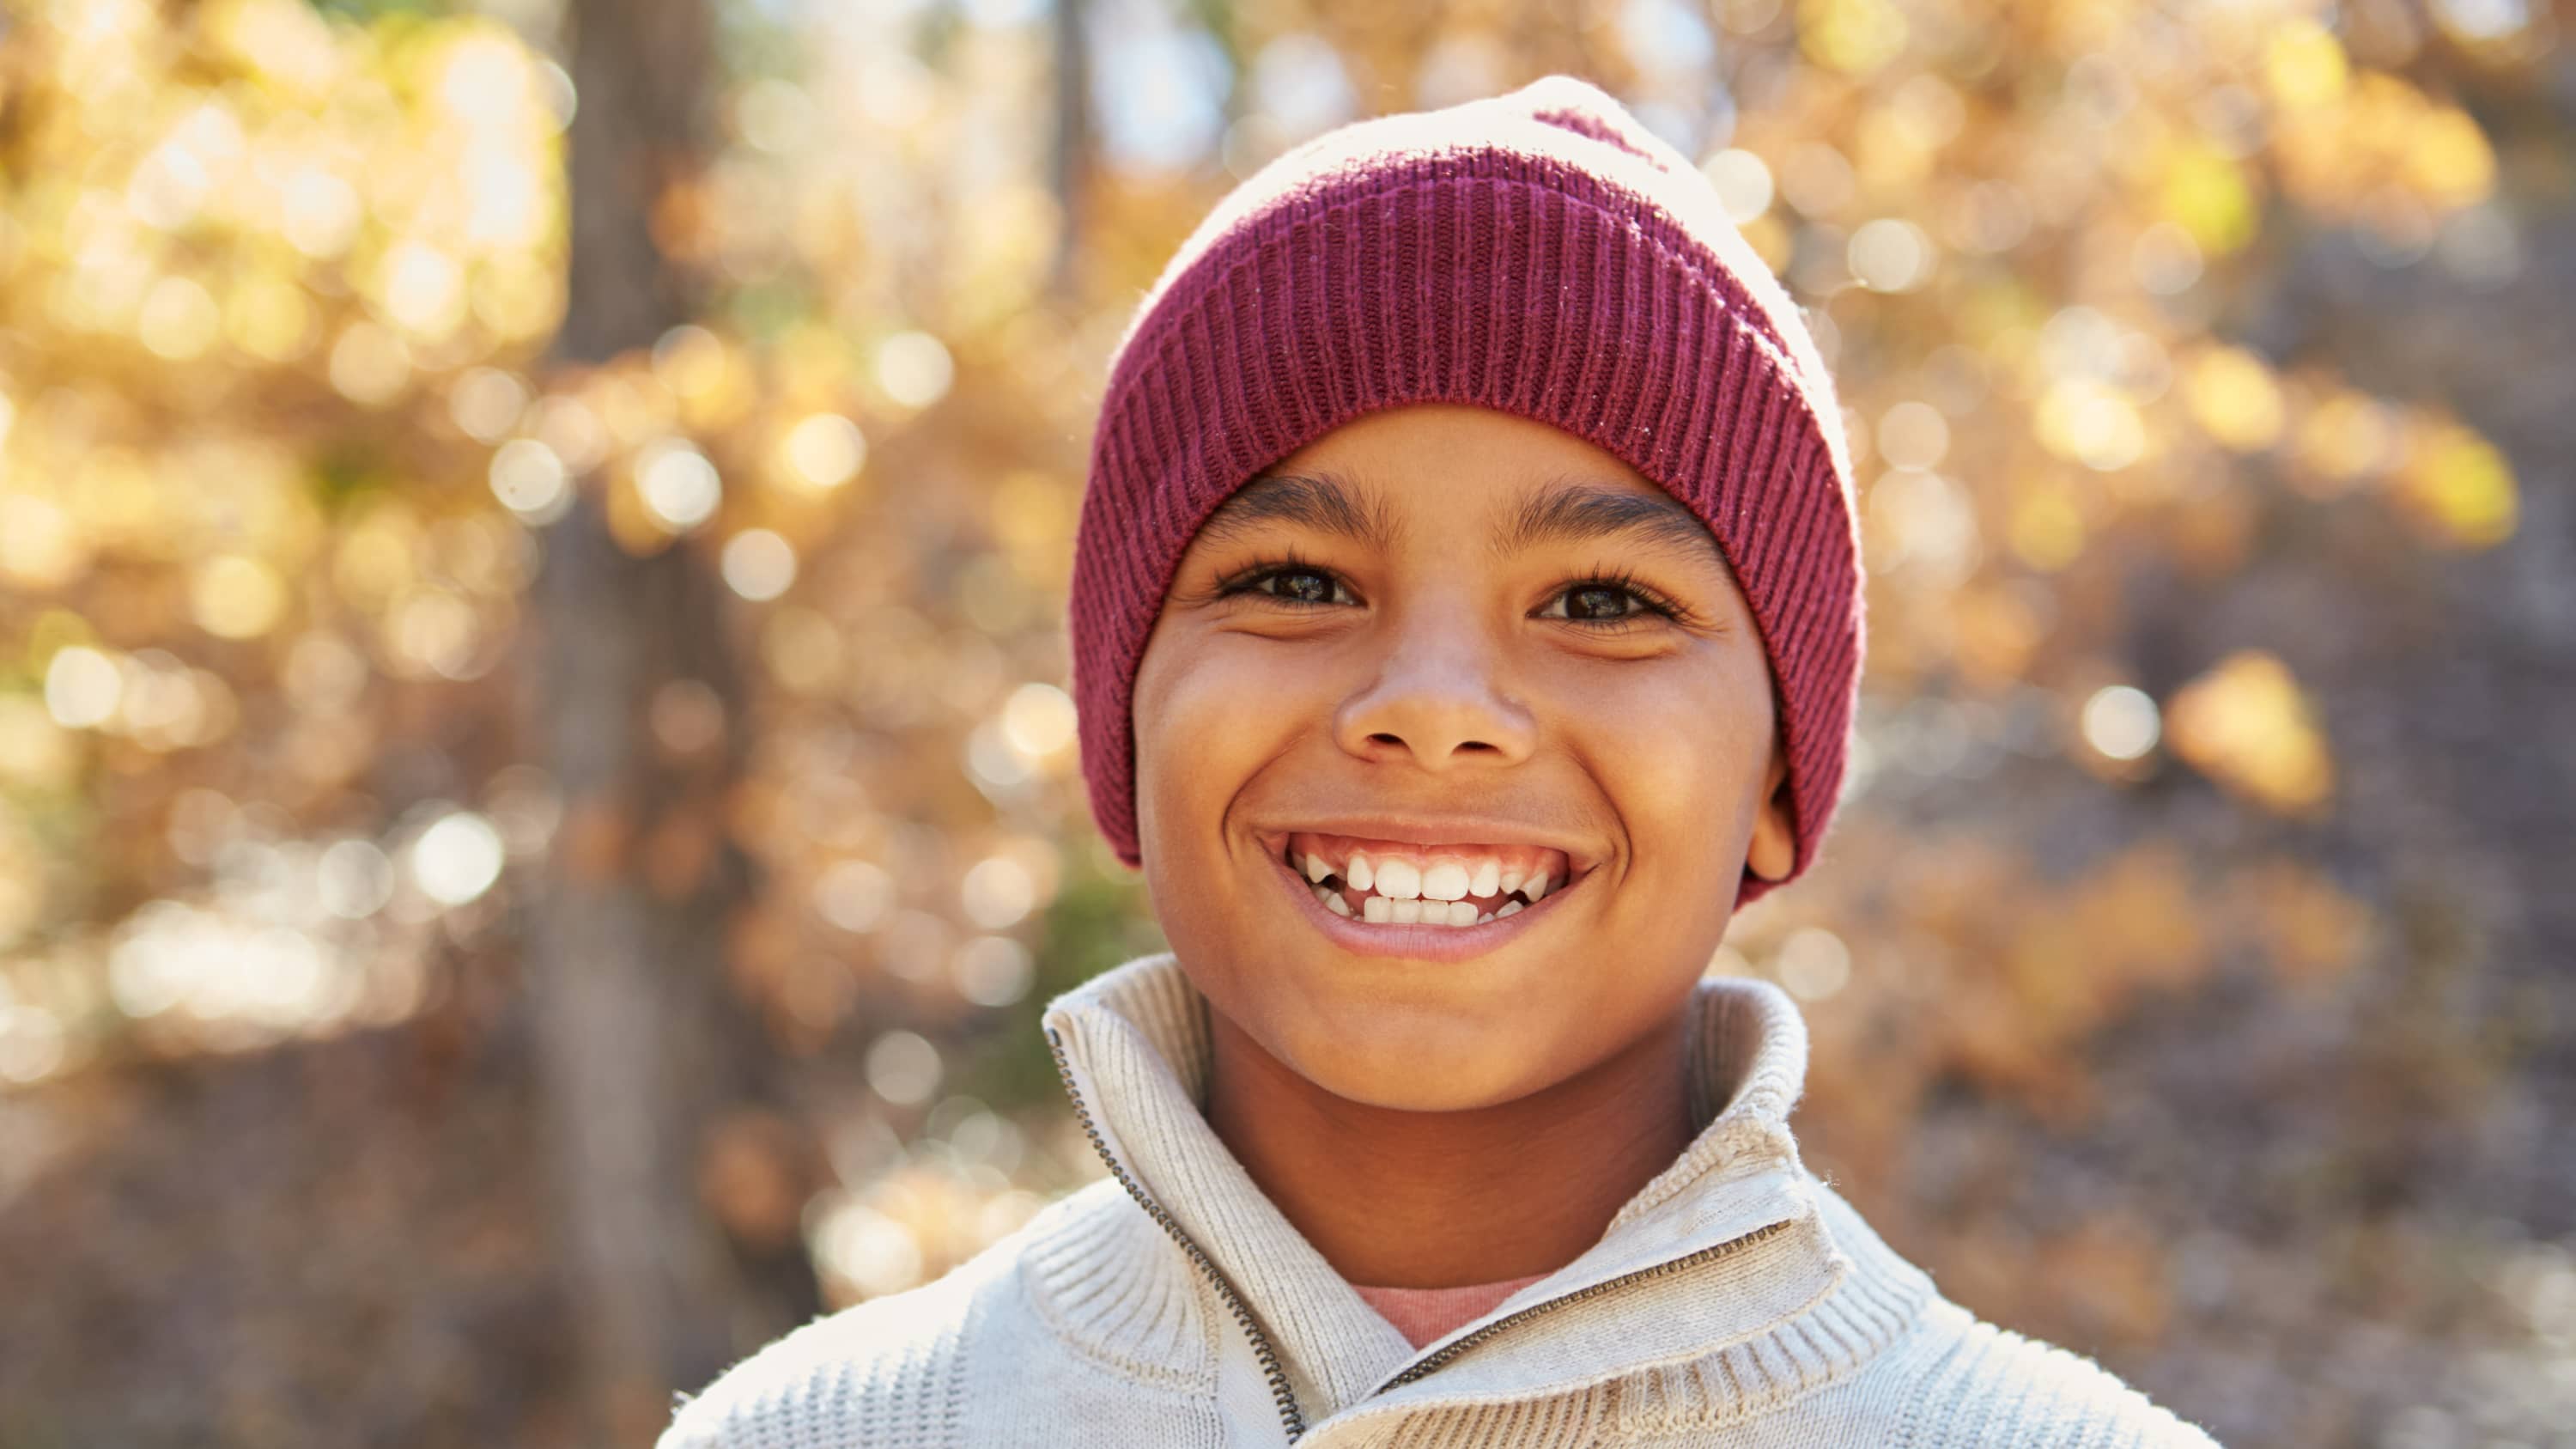 Boy who may have ADHD stands outside with a hat on, smiling.